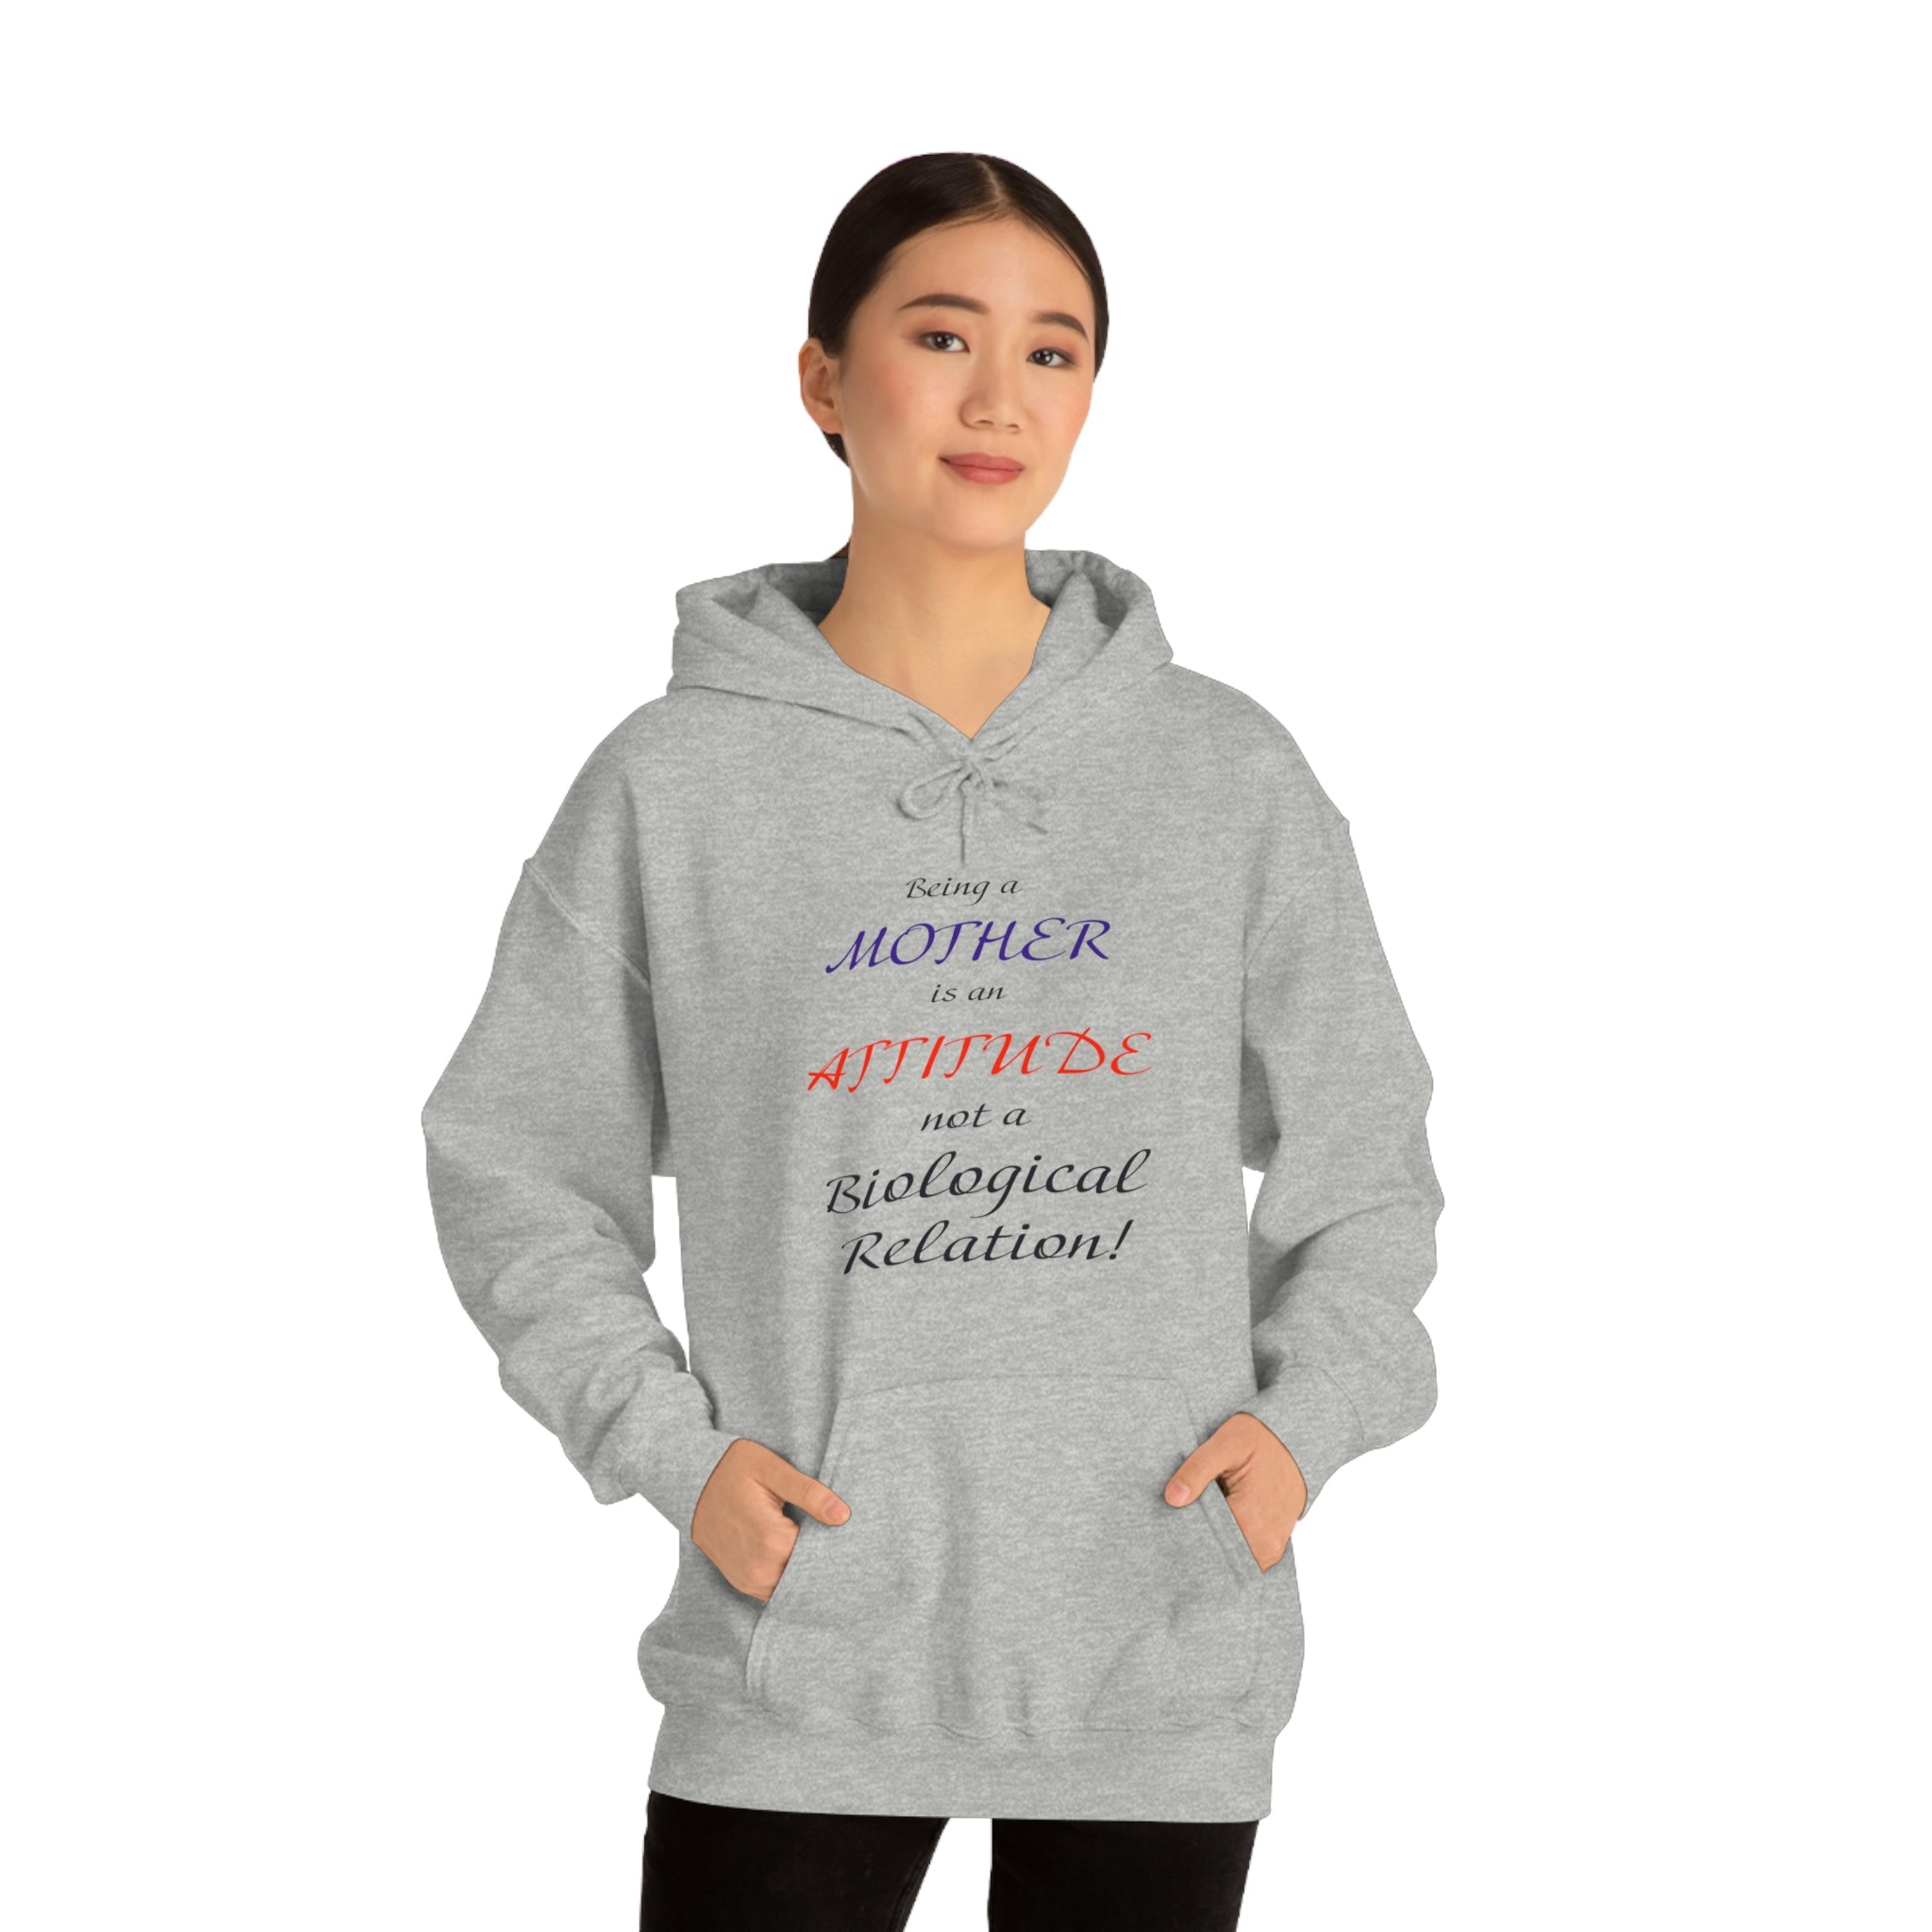 Being A Mother Is An Attitude Not A Biological Relation - Unisex Heavy Blend™ Hooded Sweatshirt